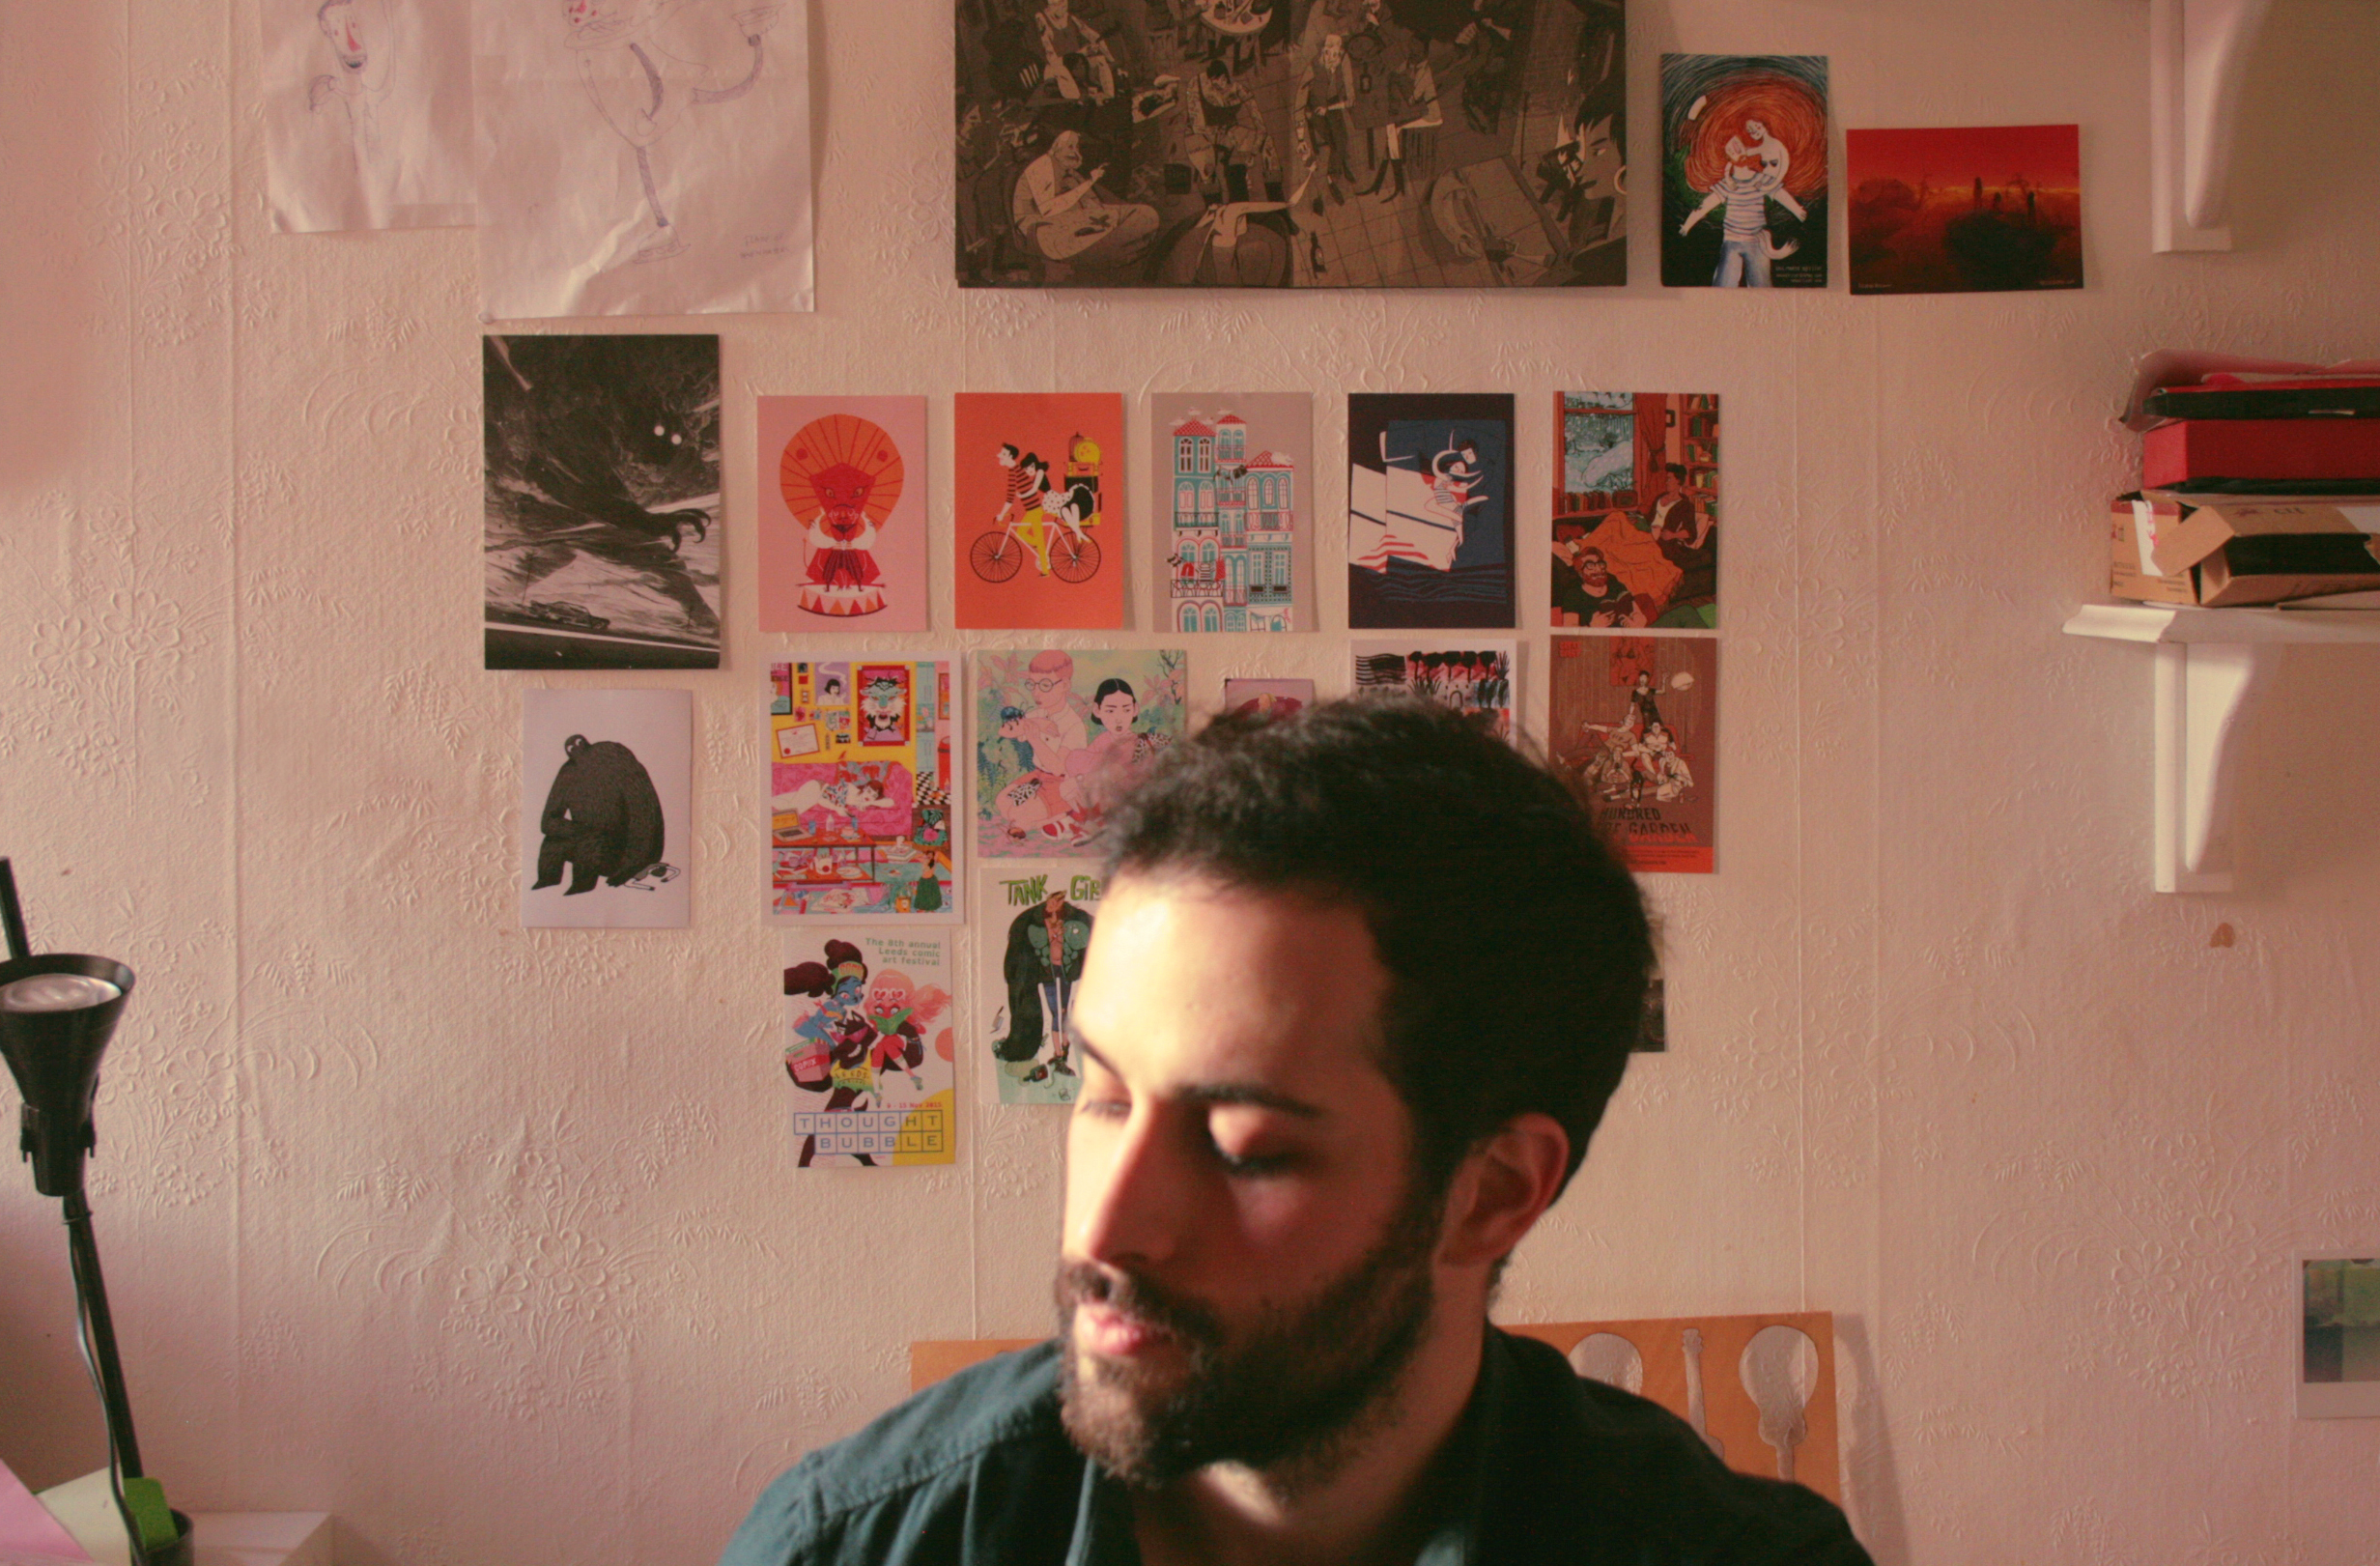 Ricardo Bessa on work life balance, graphic novels, and living in London.